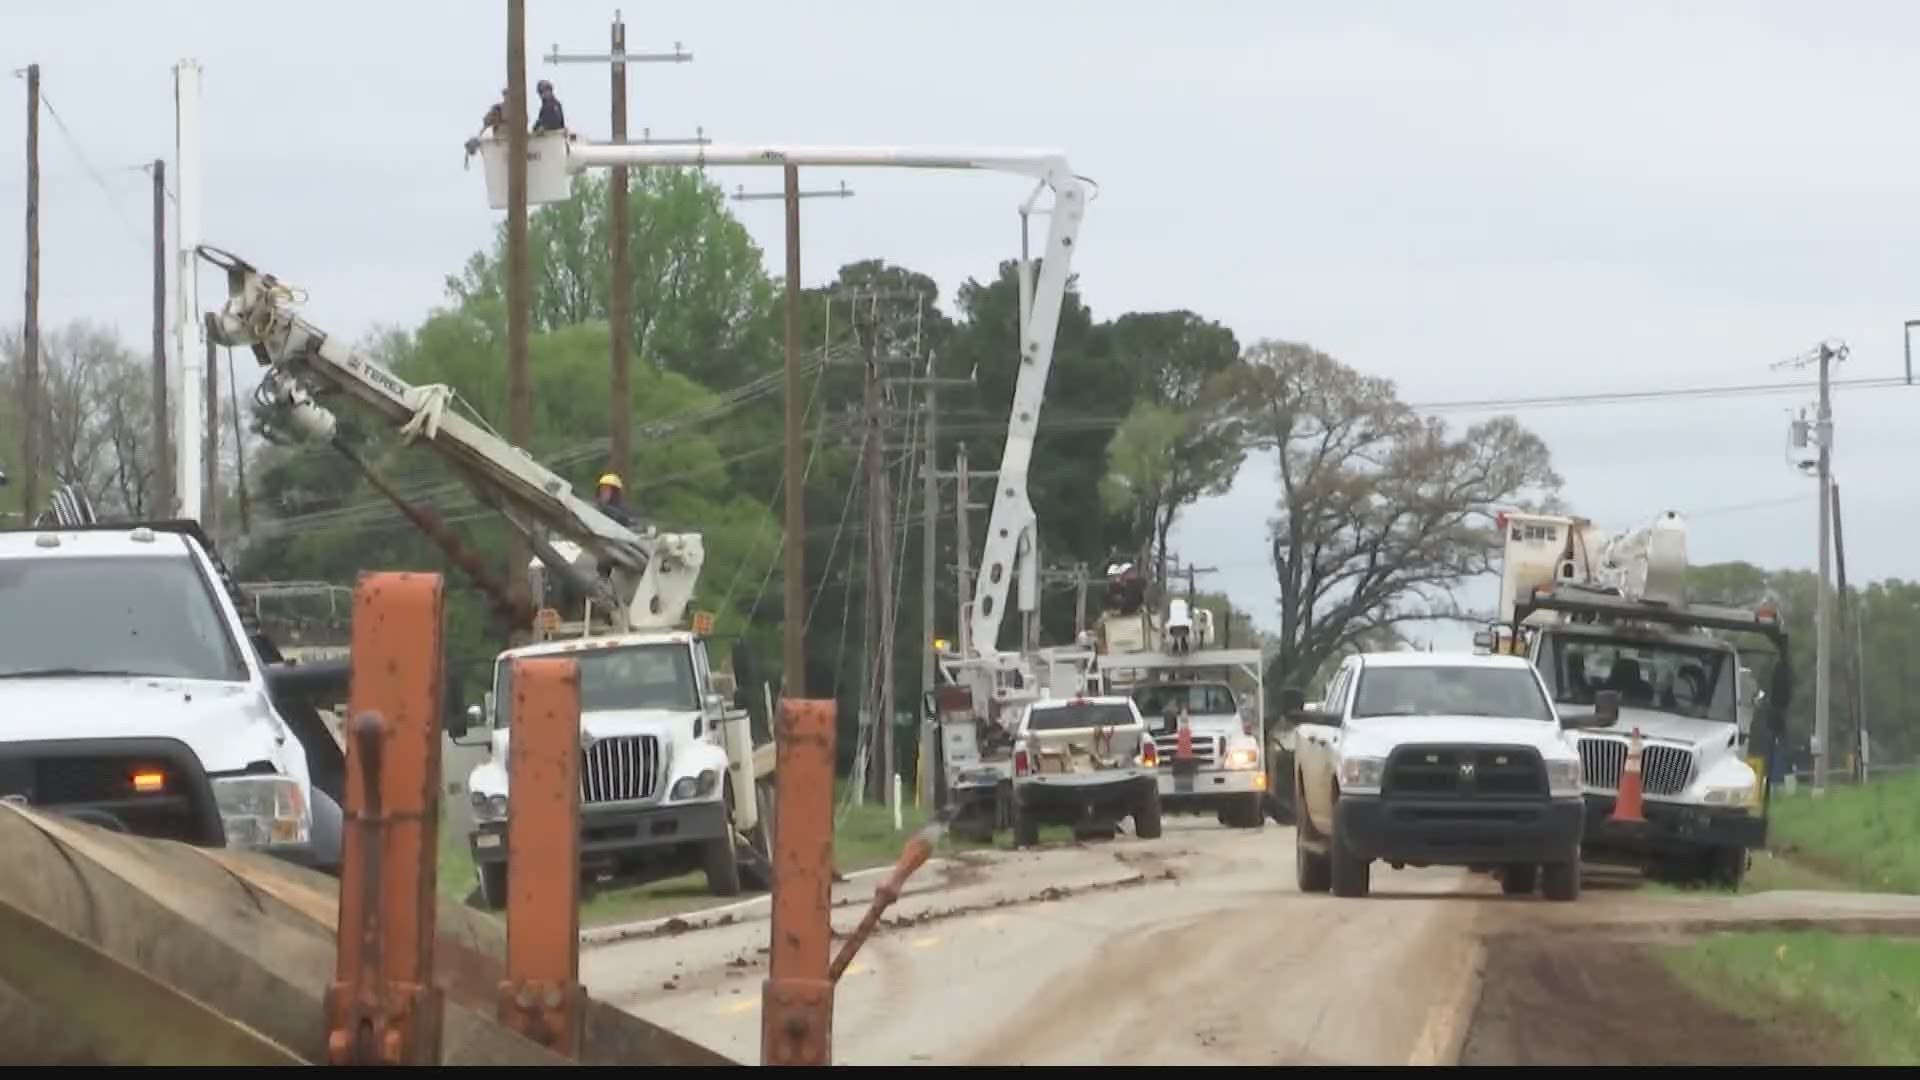 Athens Utilities workers spent the day replacing power poles in the Belle Mina area damaged by storms.